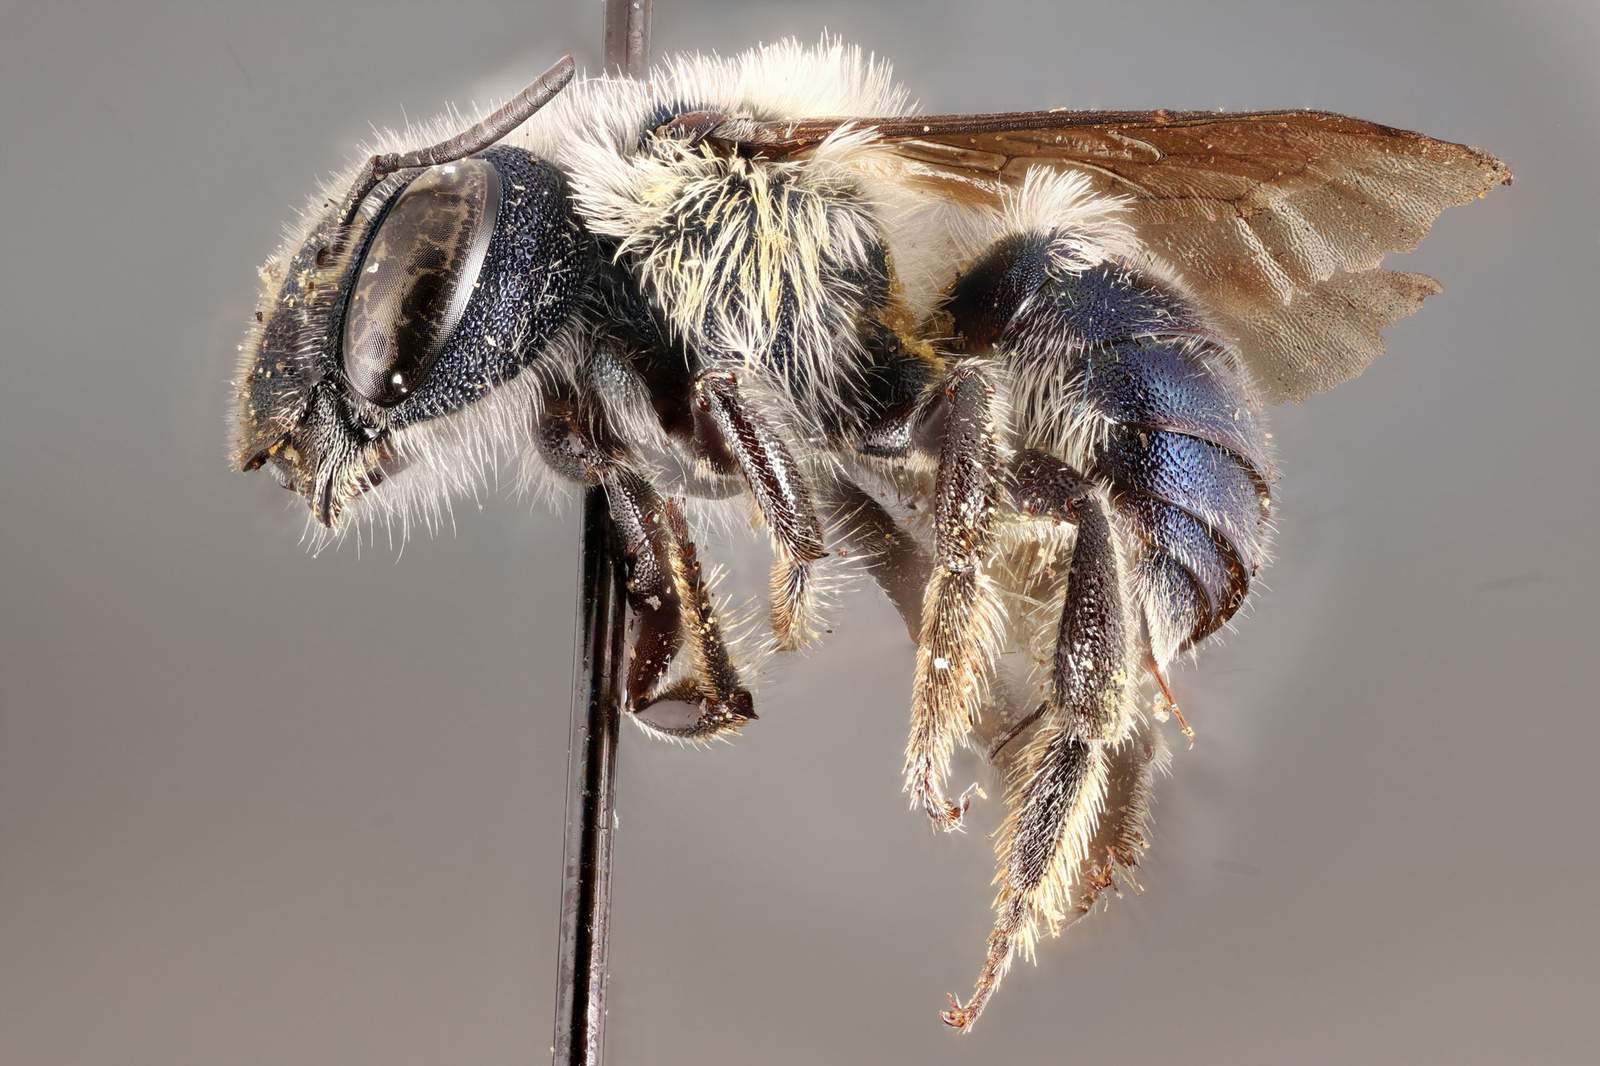 A rare blue bee scientists thought might have become extinct has been rediscovered